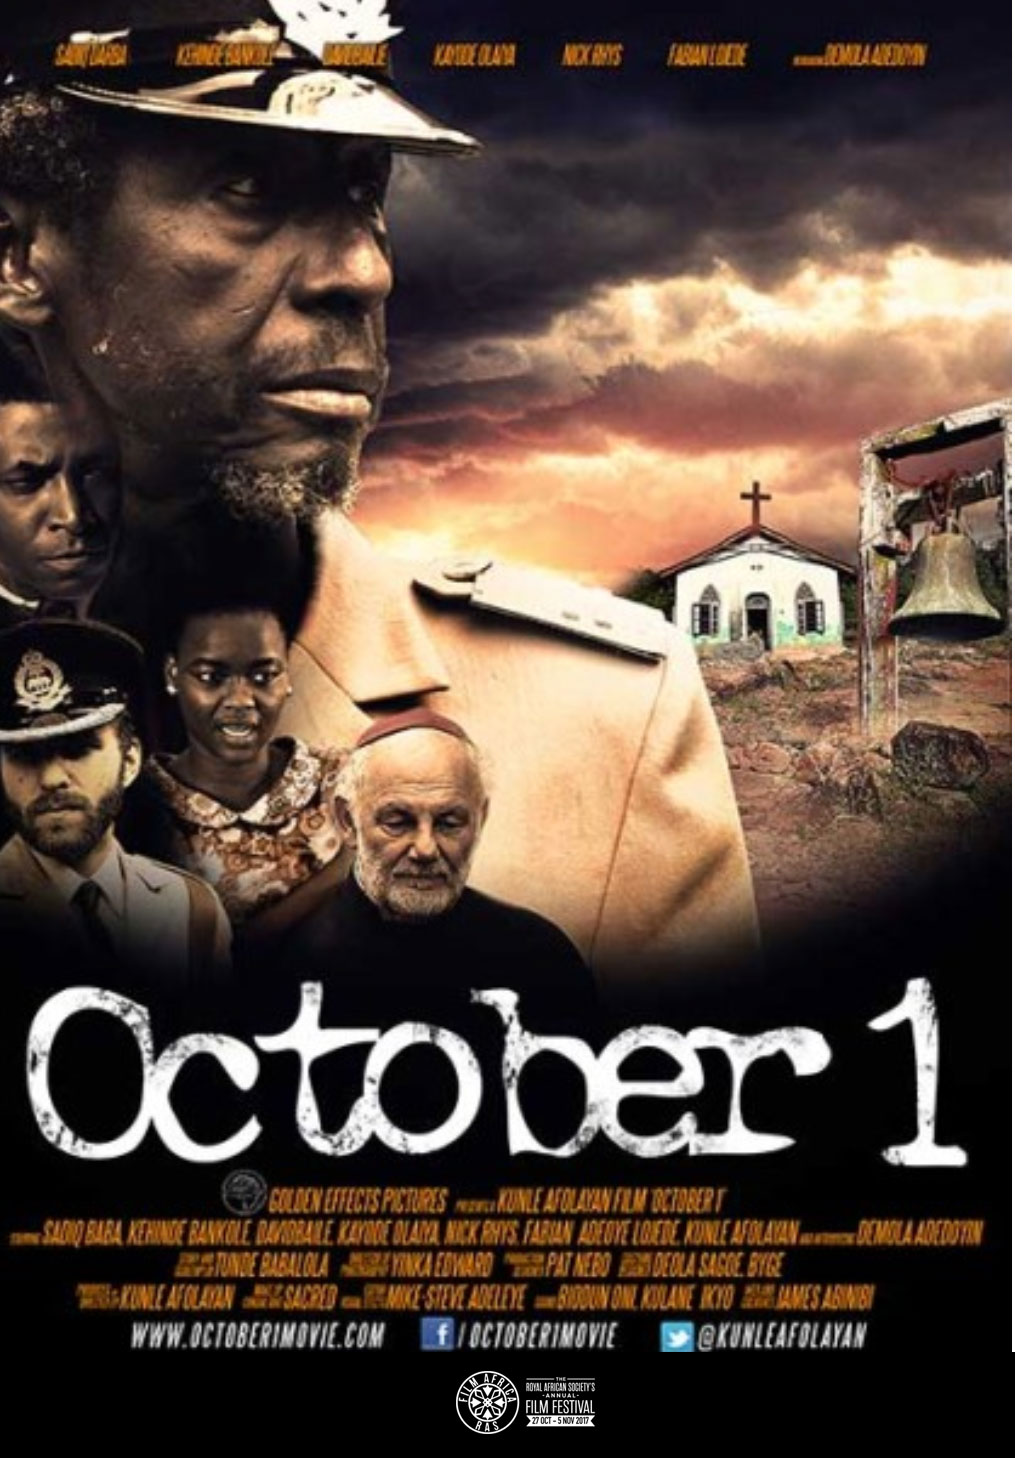 The movie: October 1